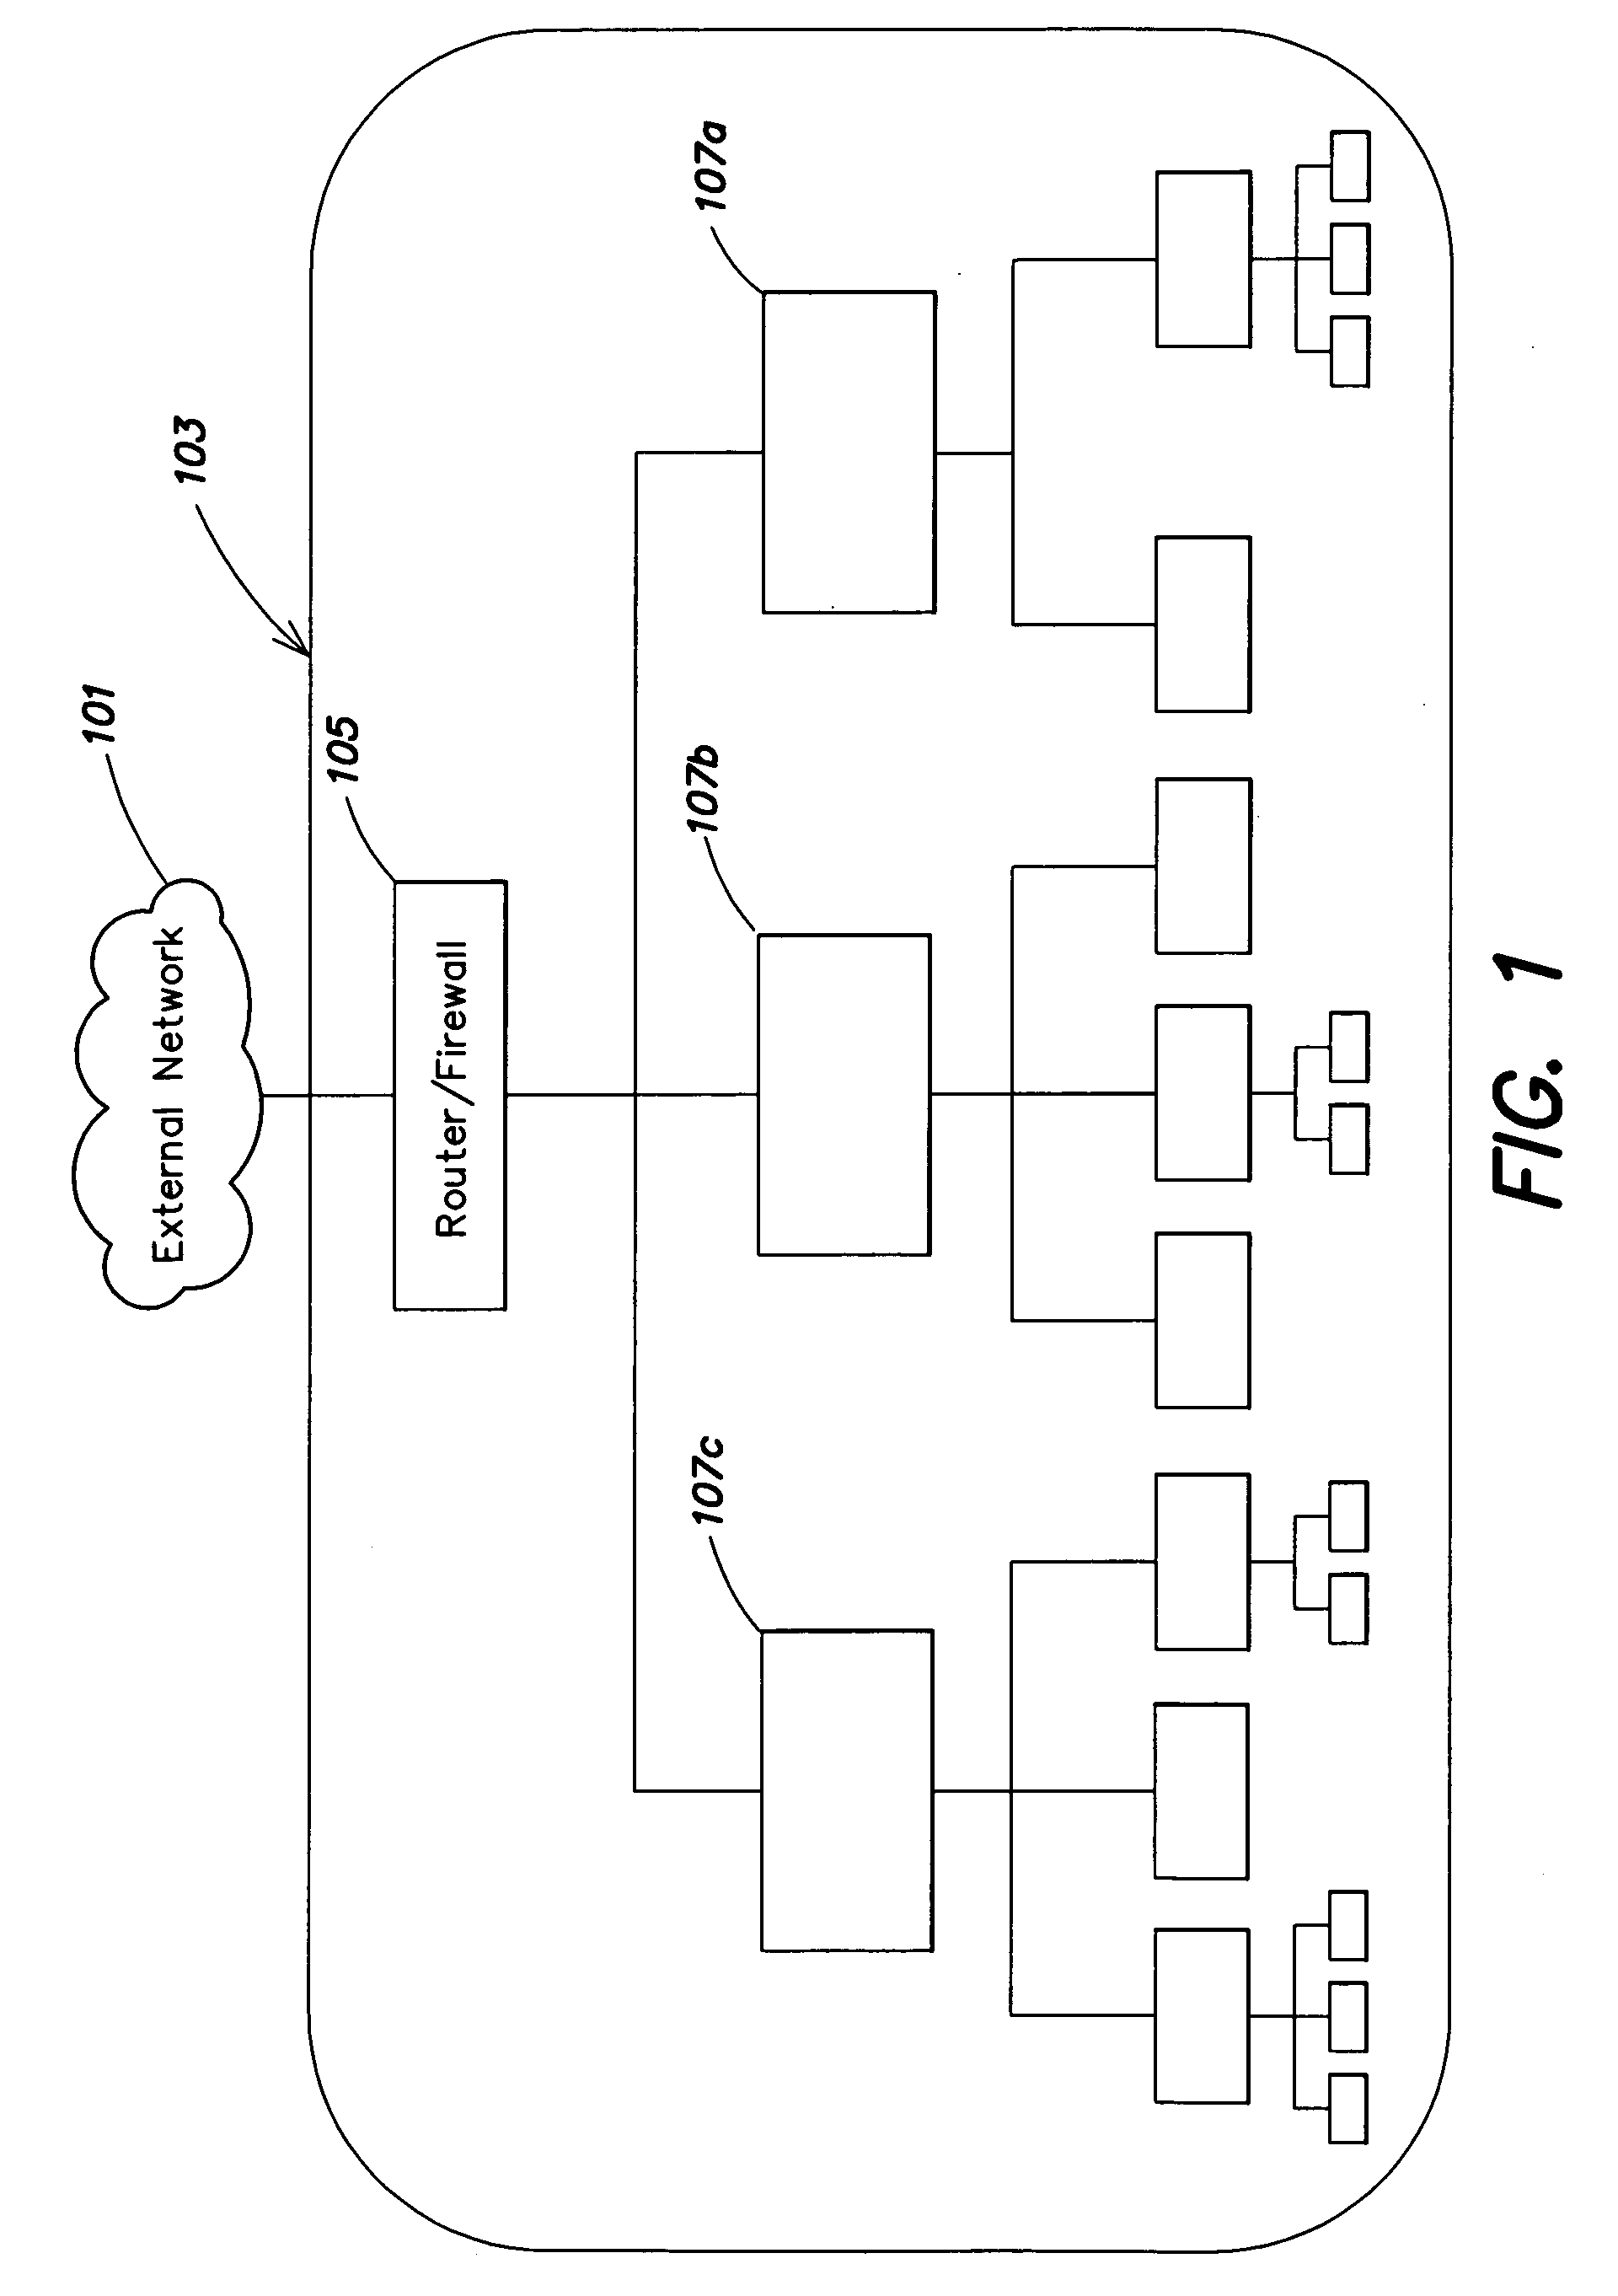 System and method for managing computer networks